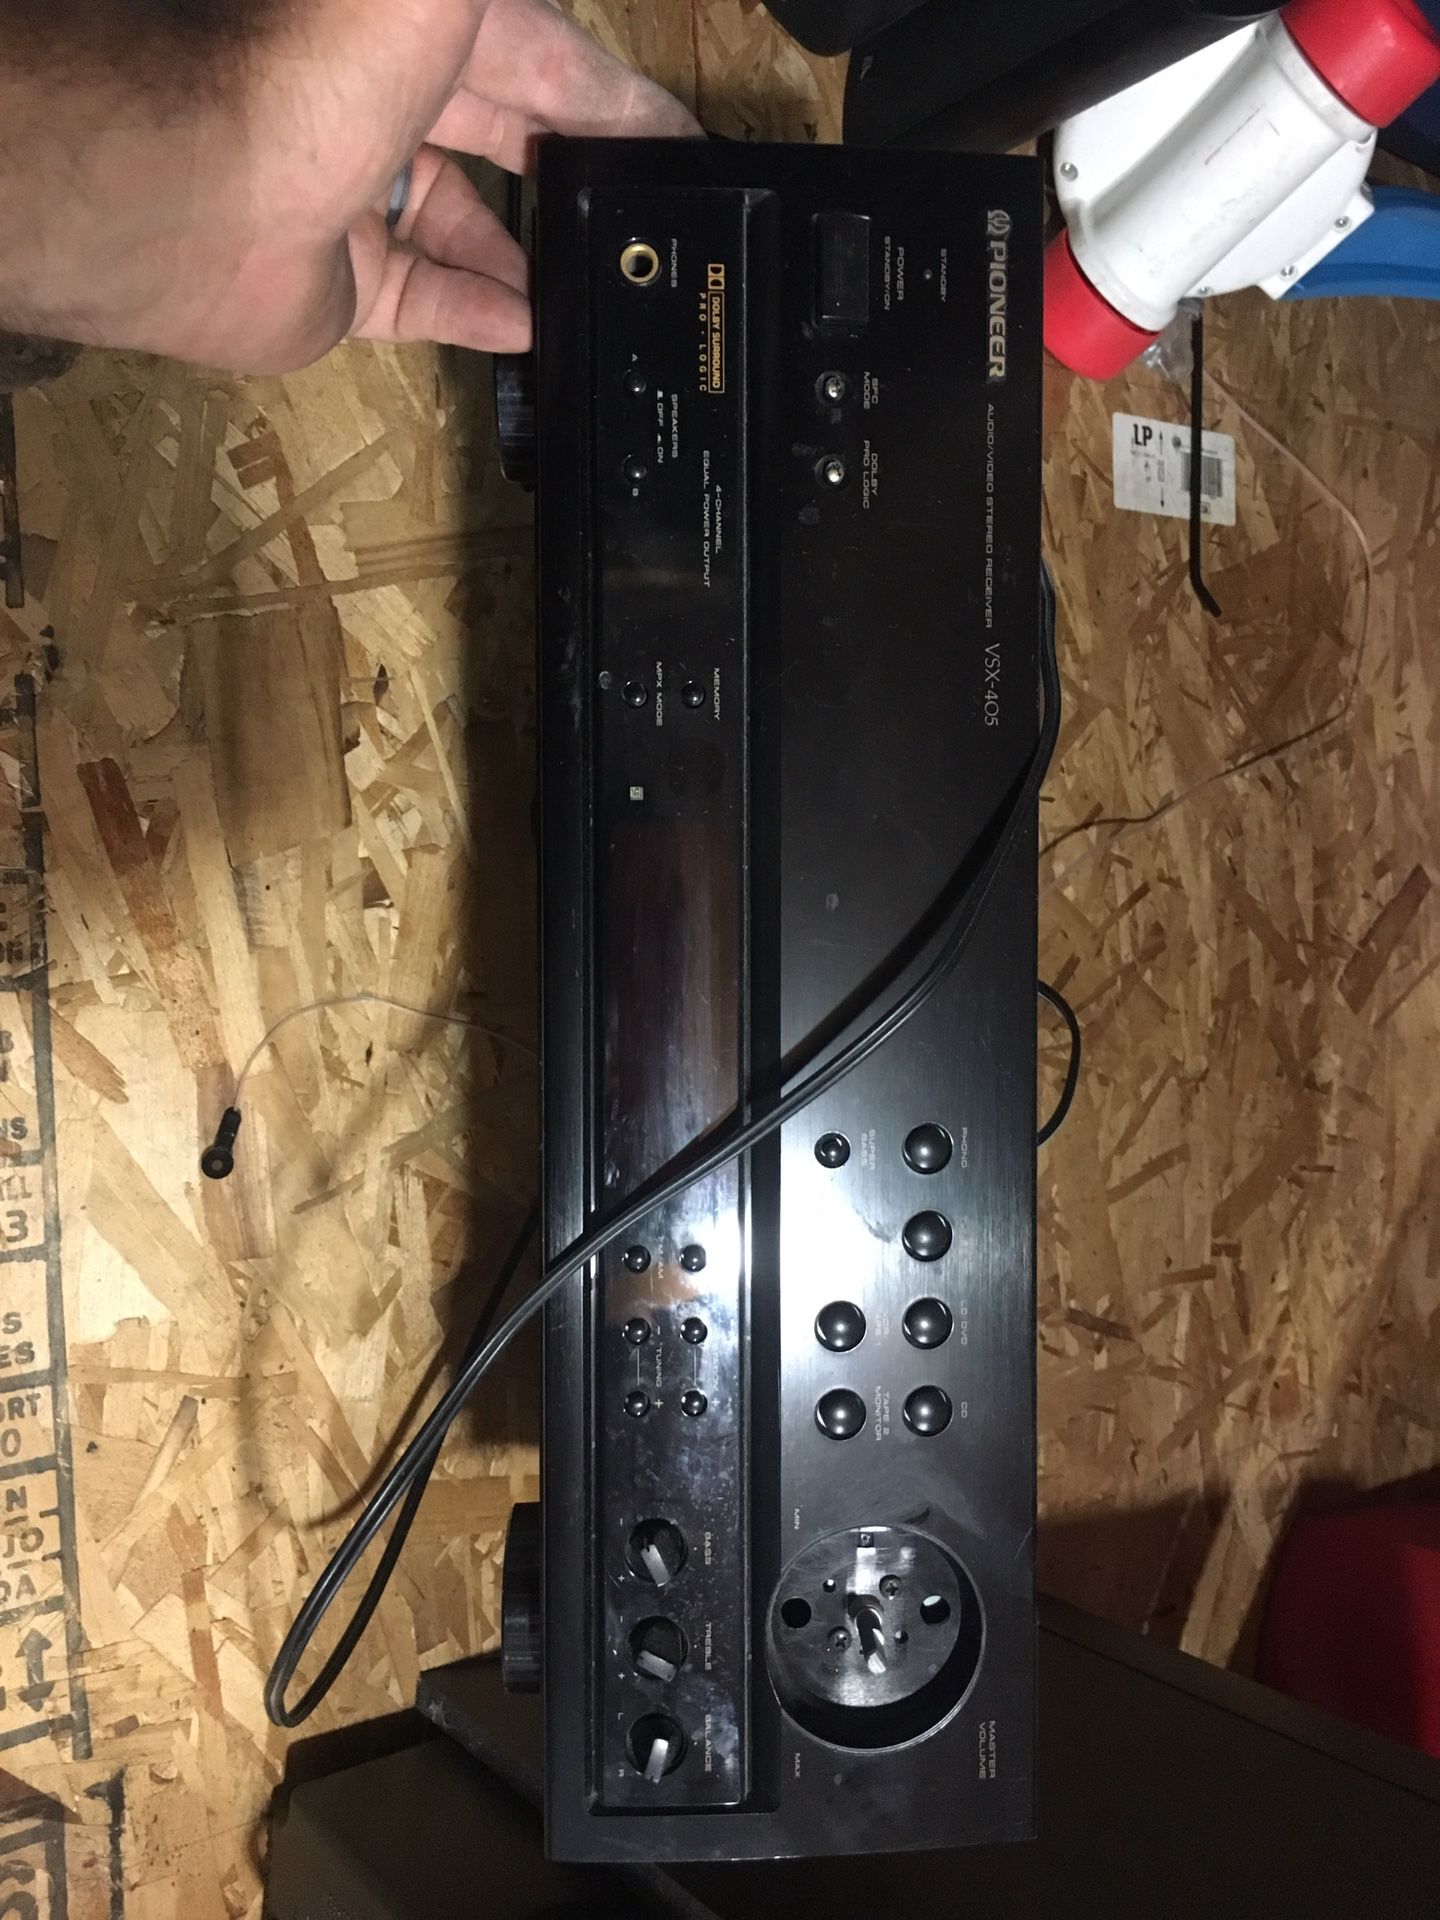 Pioneer audio video stereo receiver missing volume knob works perfectly fine